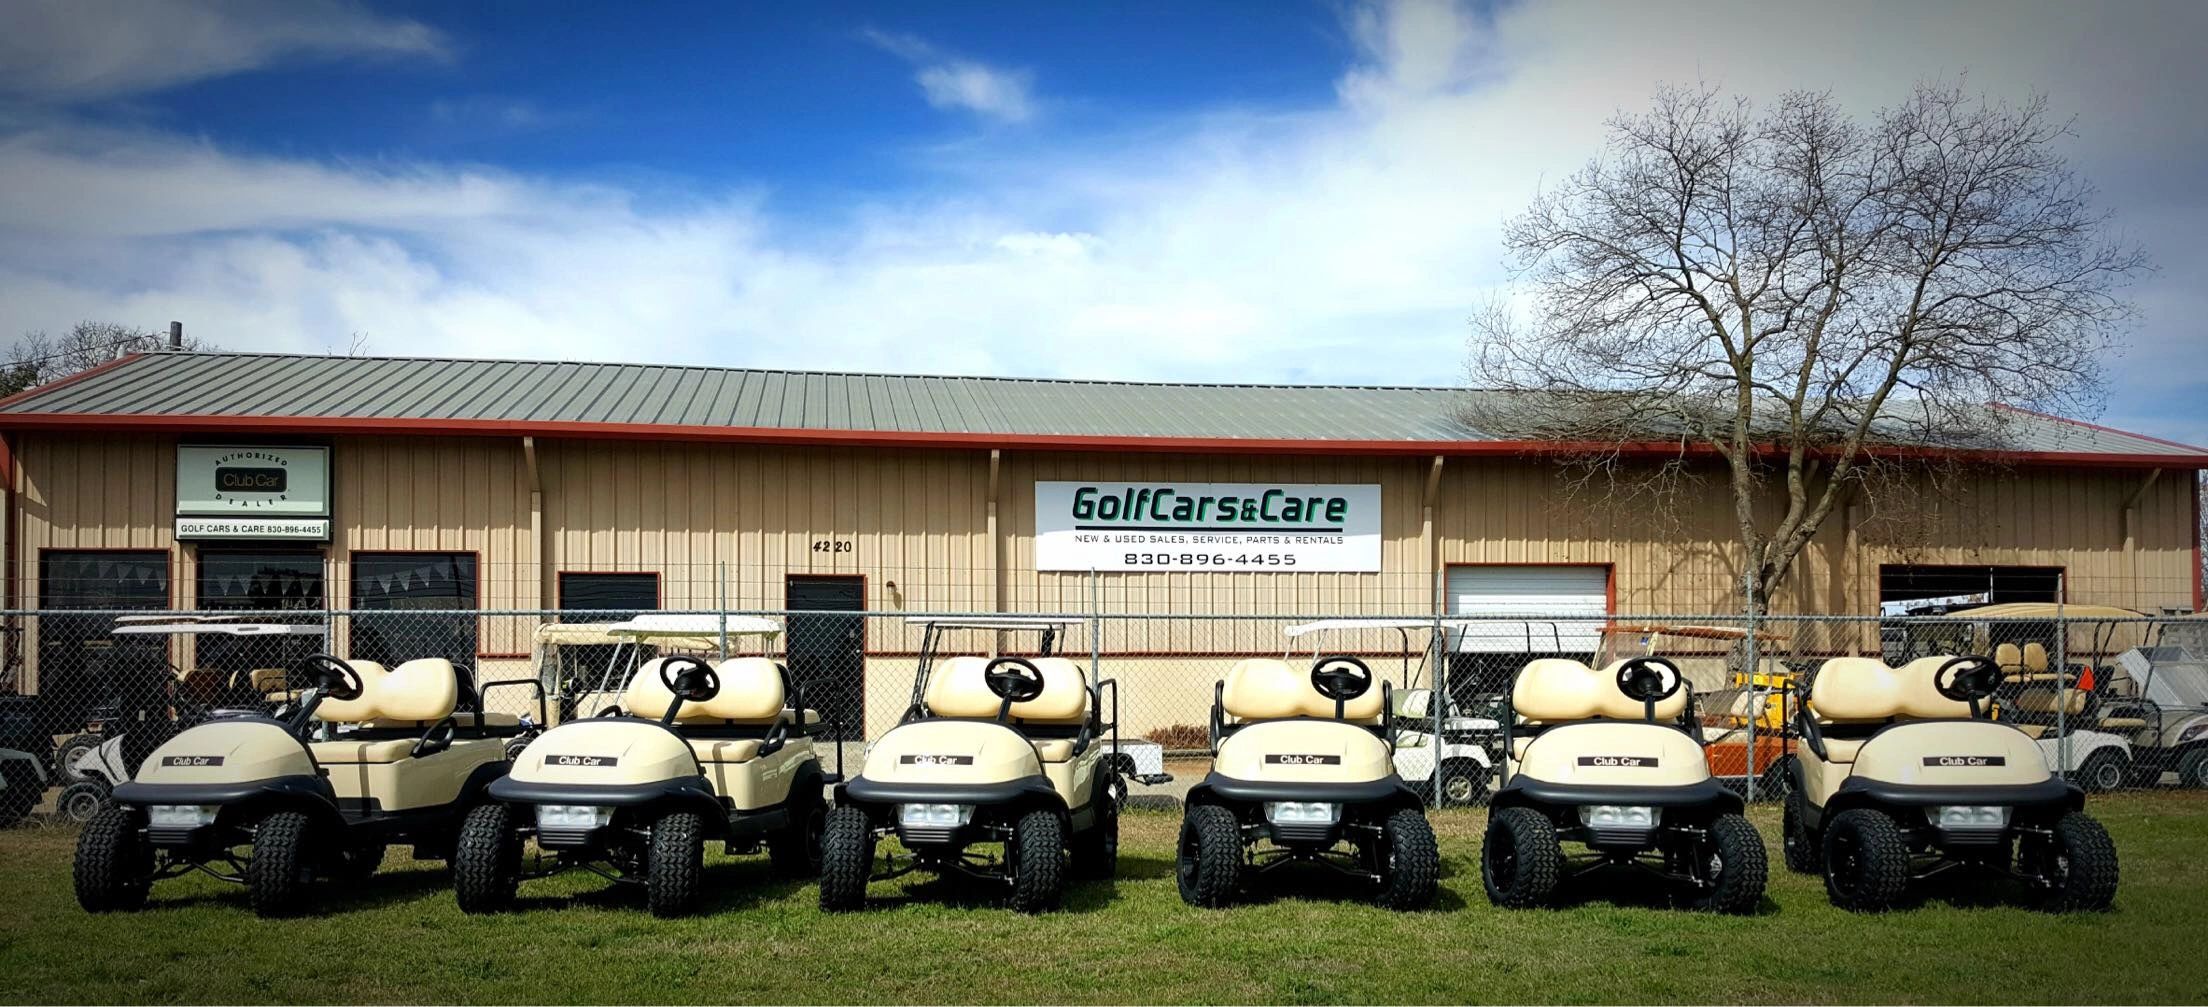 www.golfcarscare.com - Golf Cars, Parts, Cars for Sale